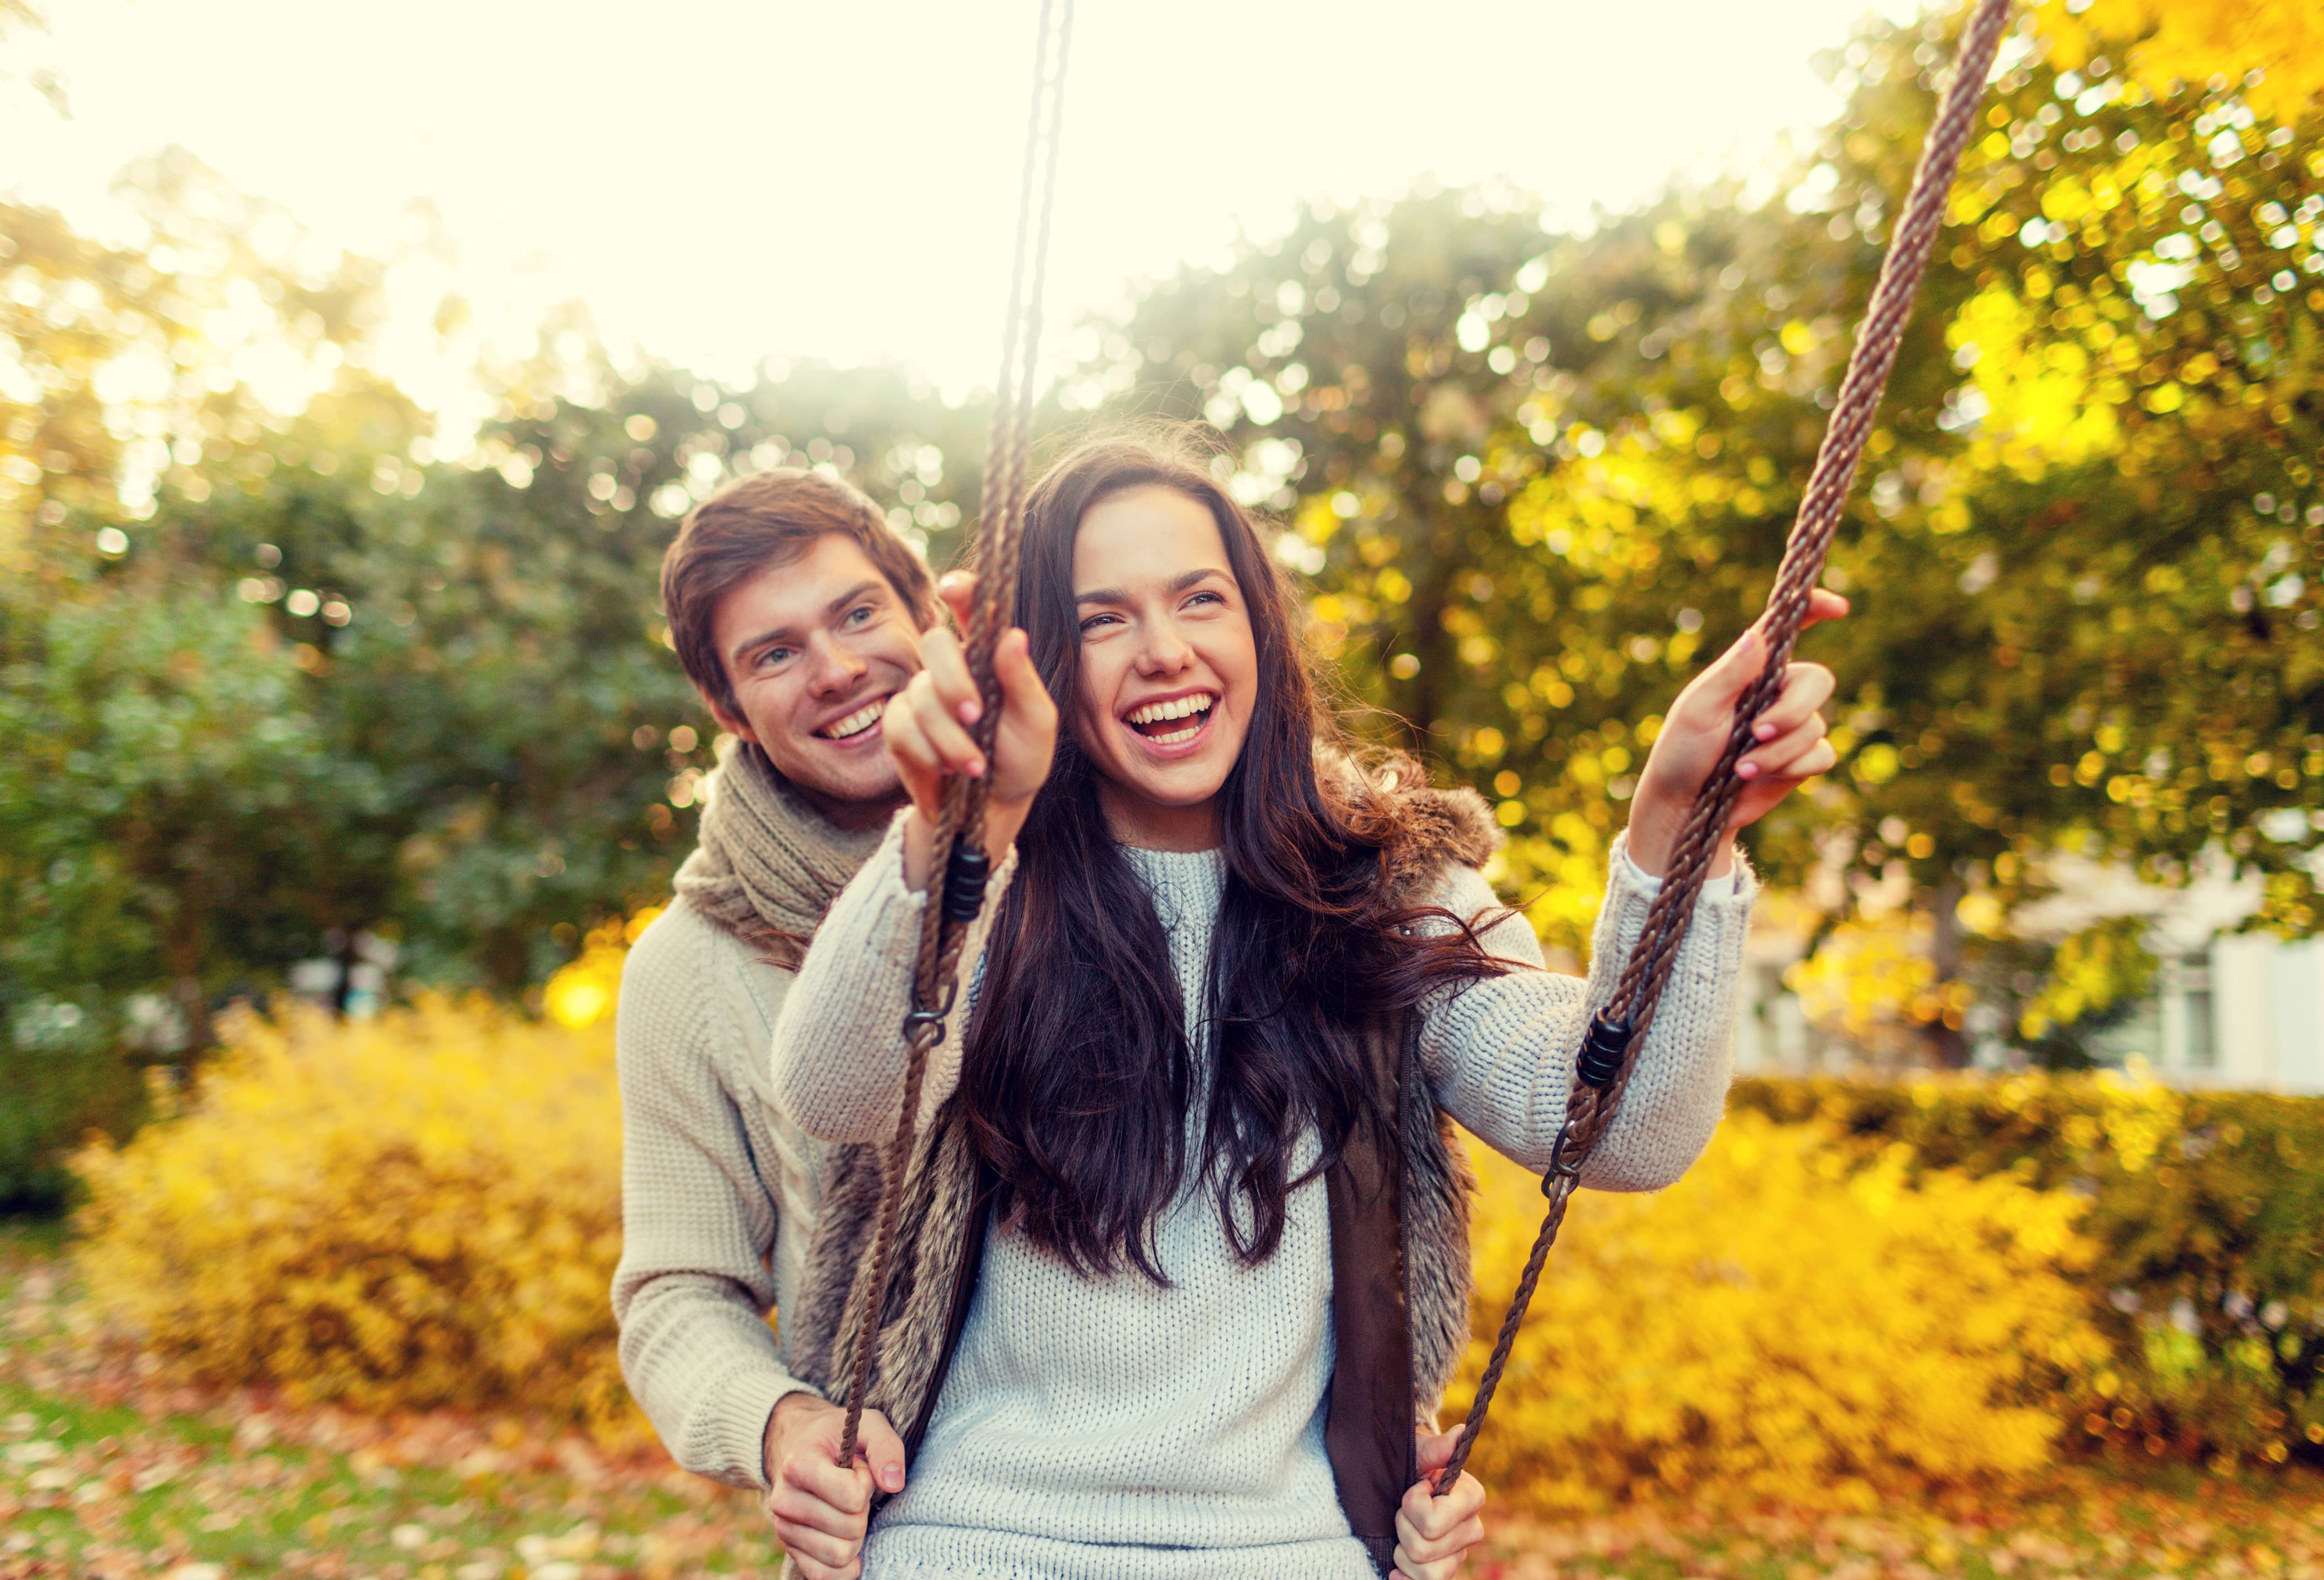 8 Fun Fall Date Ideas to Jazz Up Your Relationship